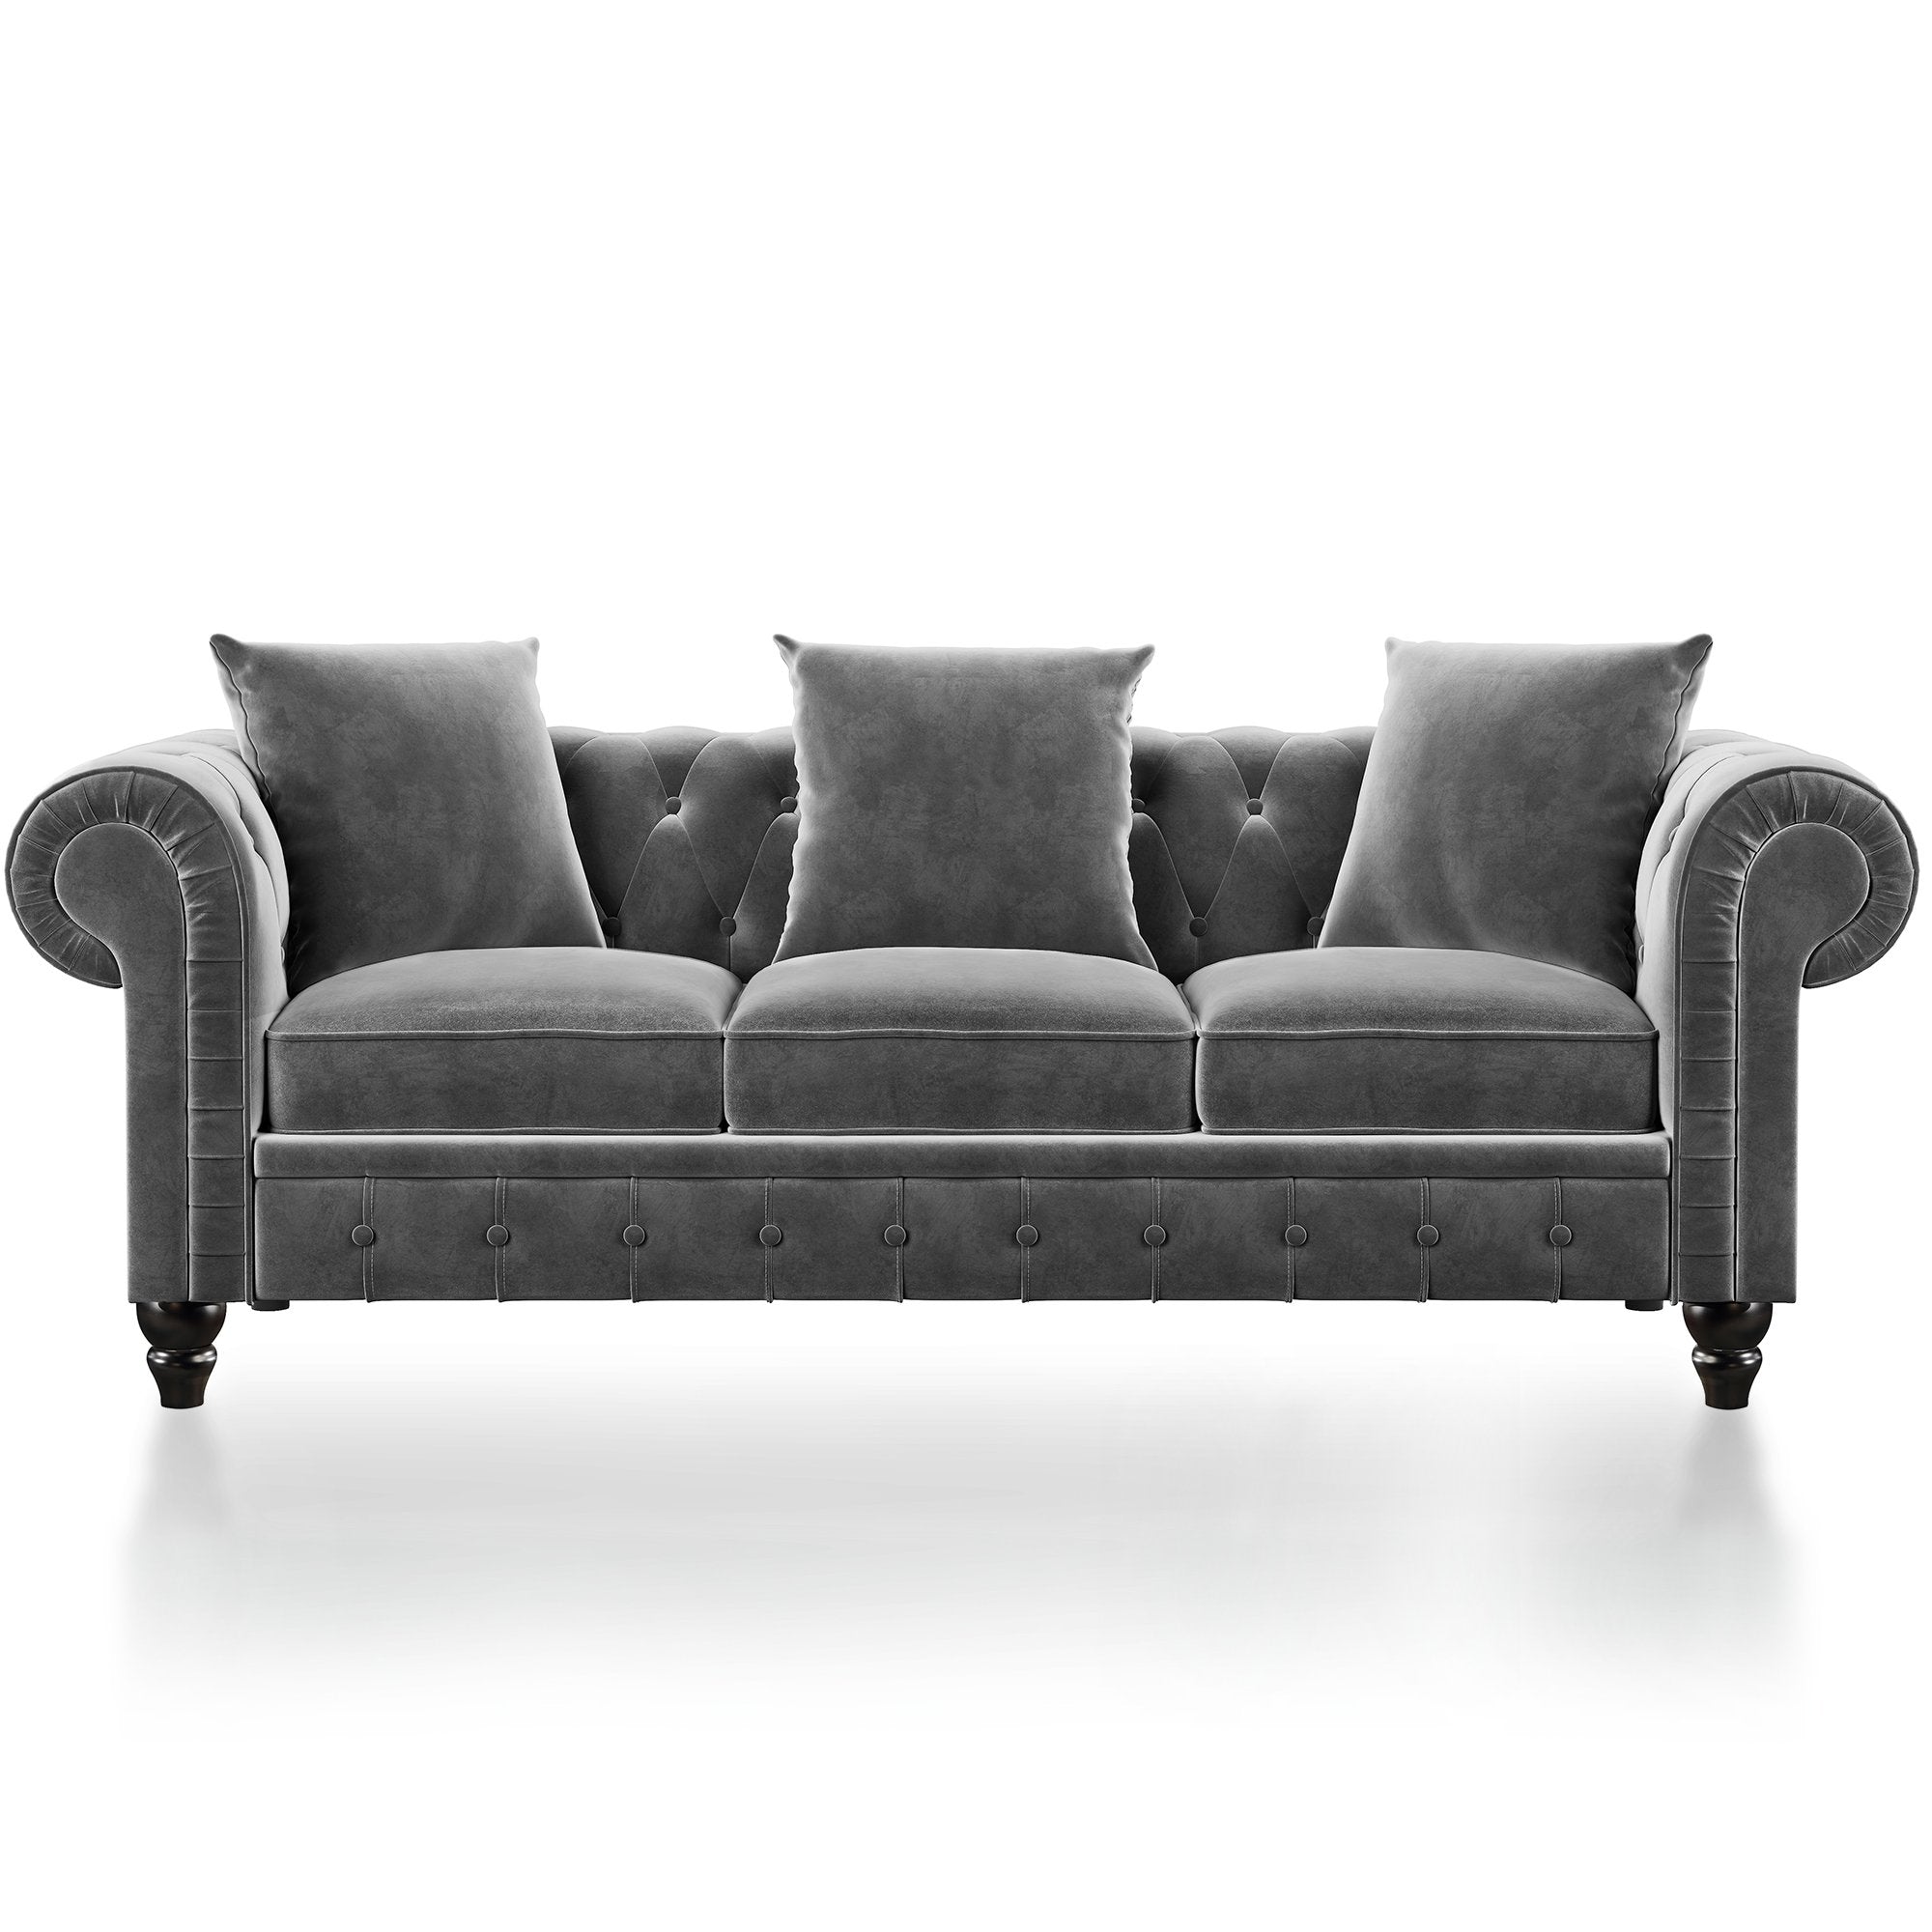 80" Chesterfield Sofa Deep Button Tufted Velvet Upholstered 3 Seat Sofa Roll Arm Classic,3 Pillows included-Boyel Living